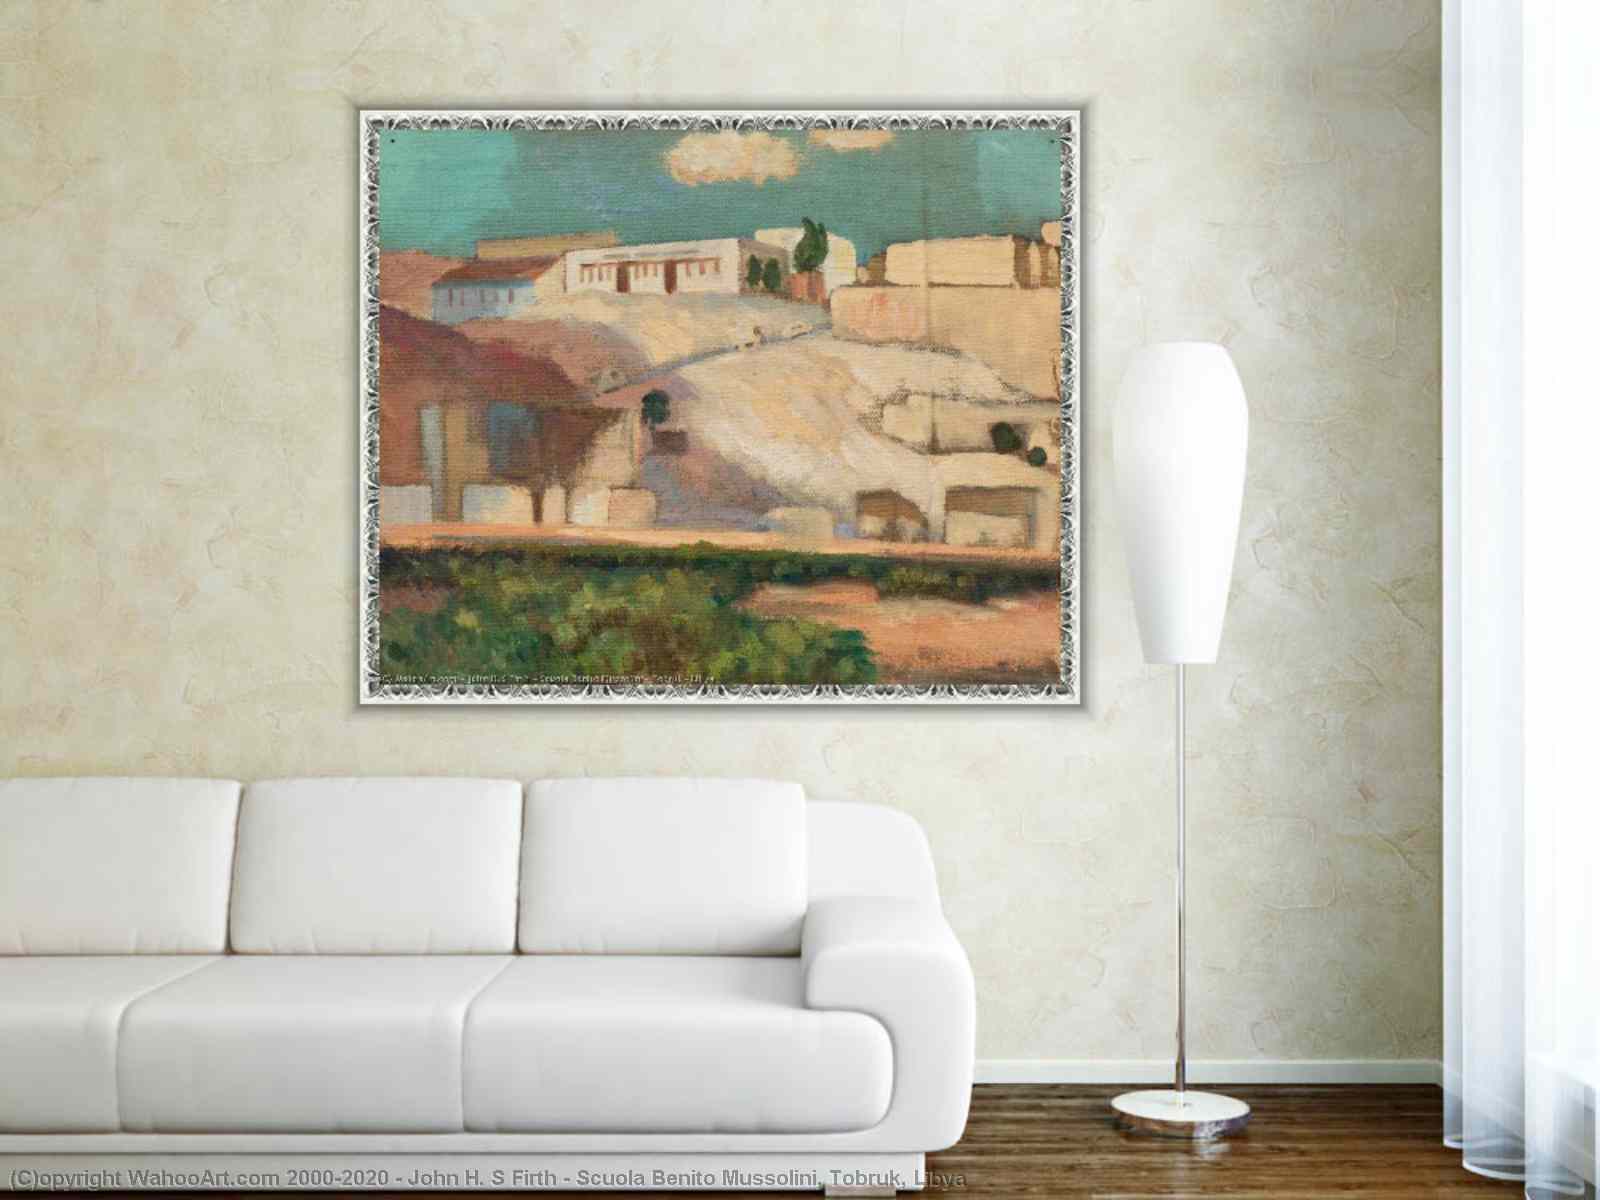 vil gøre bestemt om forladelse Museum Art Reproductions | Scuola Benito Mussolini, Tobruk, Libya, 1947 by  John H. S Firth | WahooArt.com